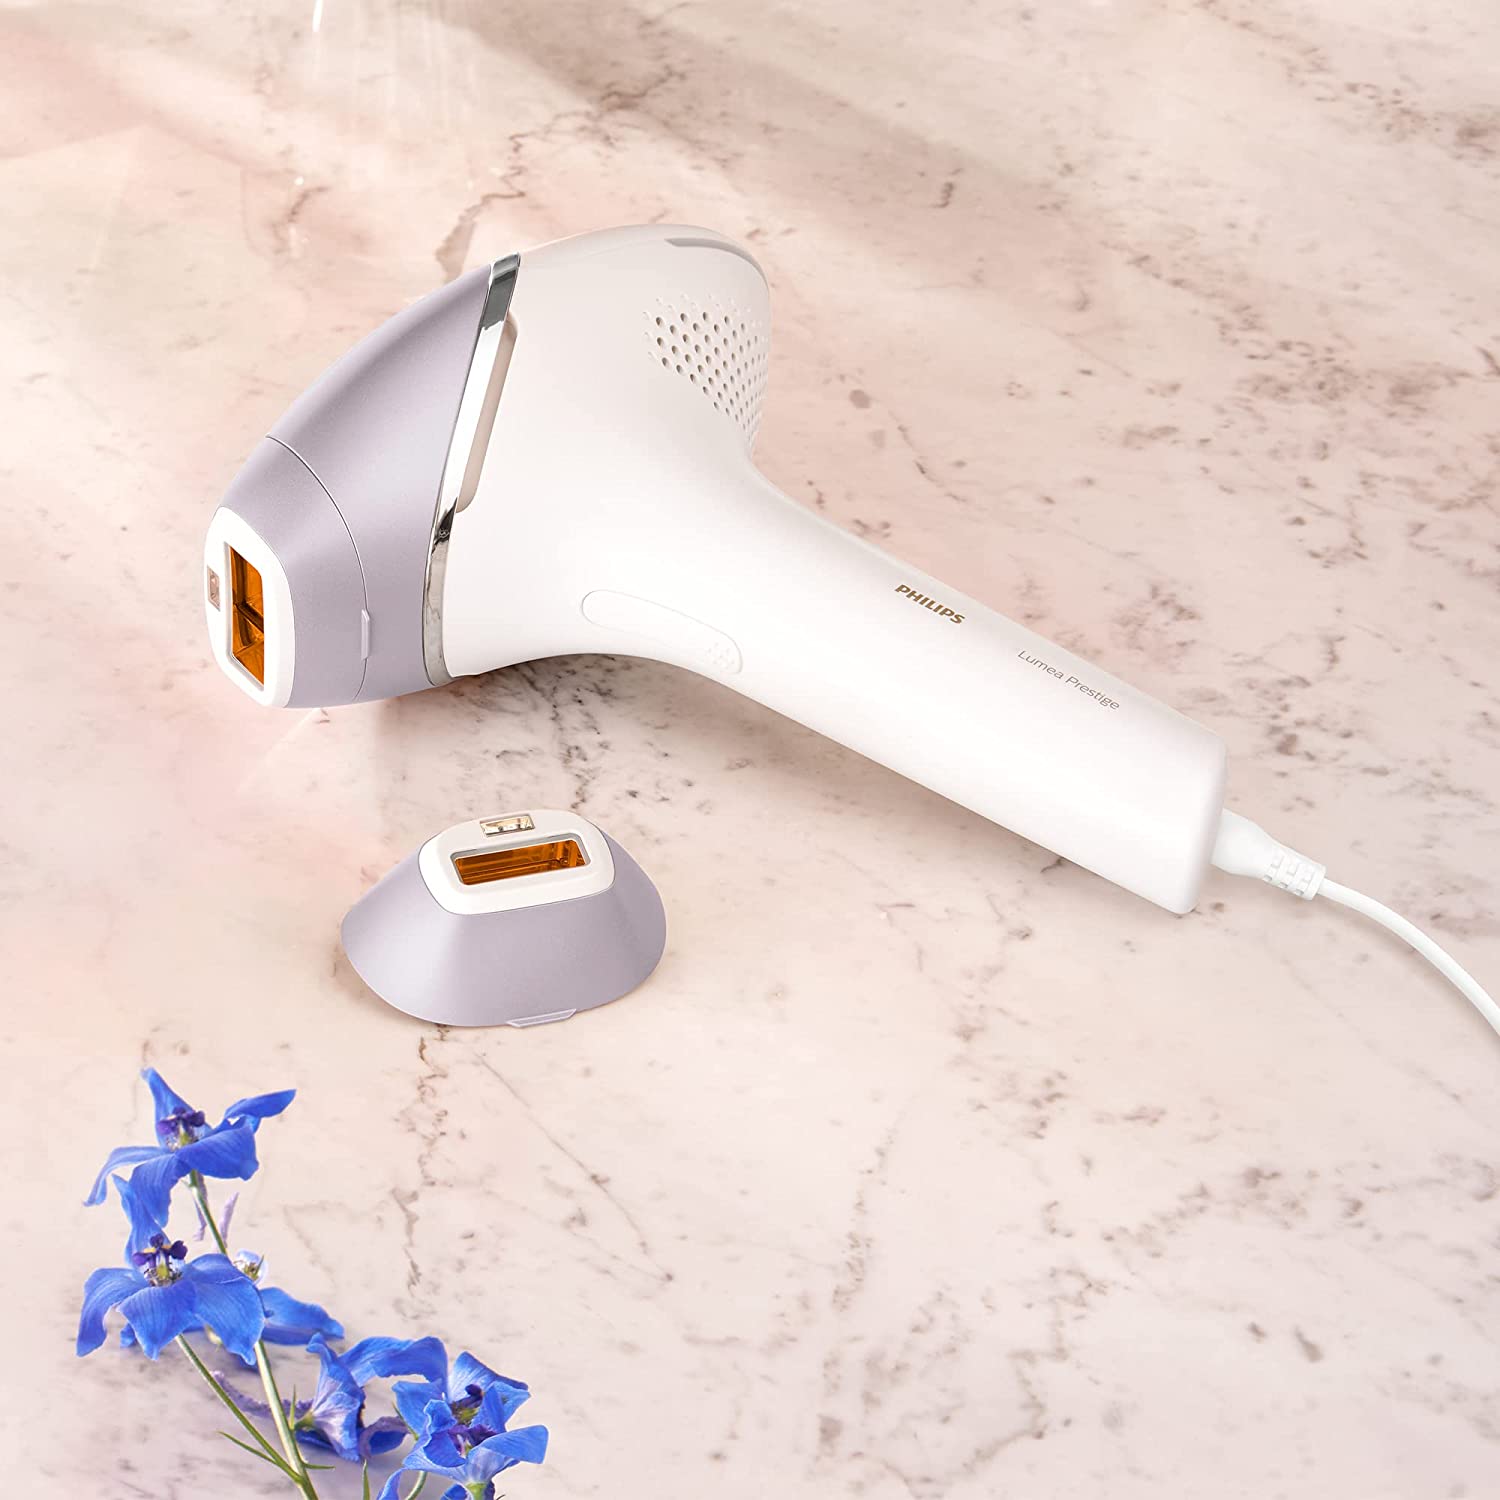 Philips Lumea IPL 8000 Series, corded with 4 attachments for Body